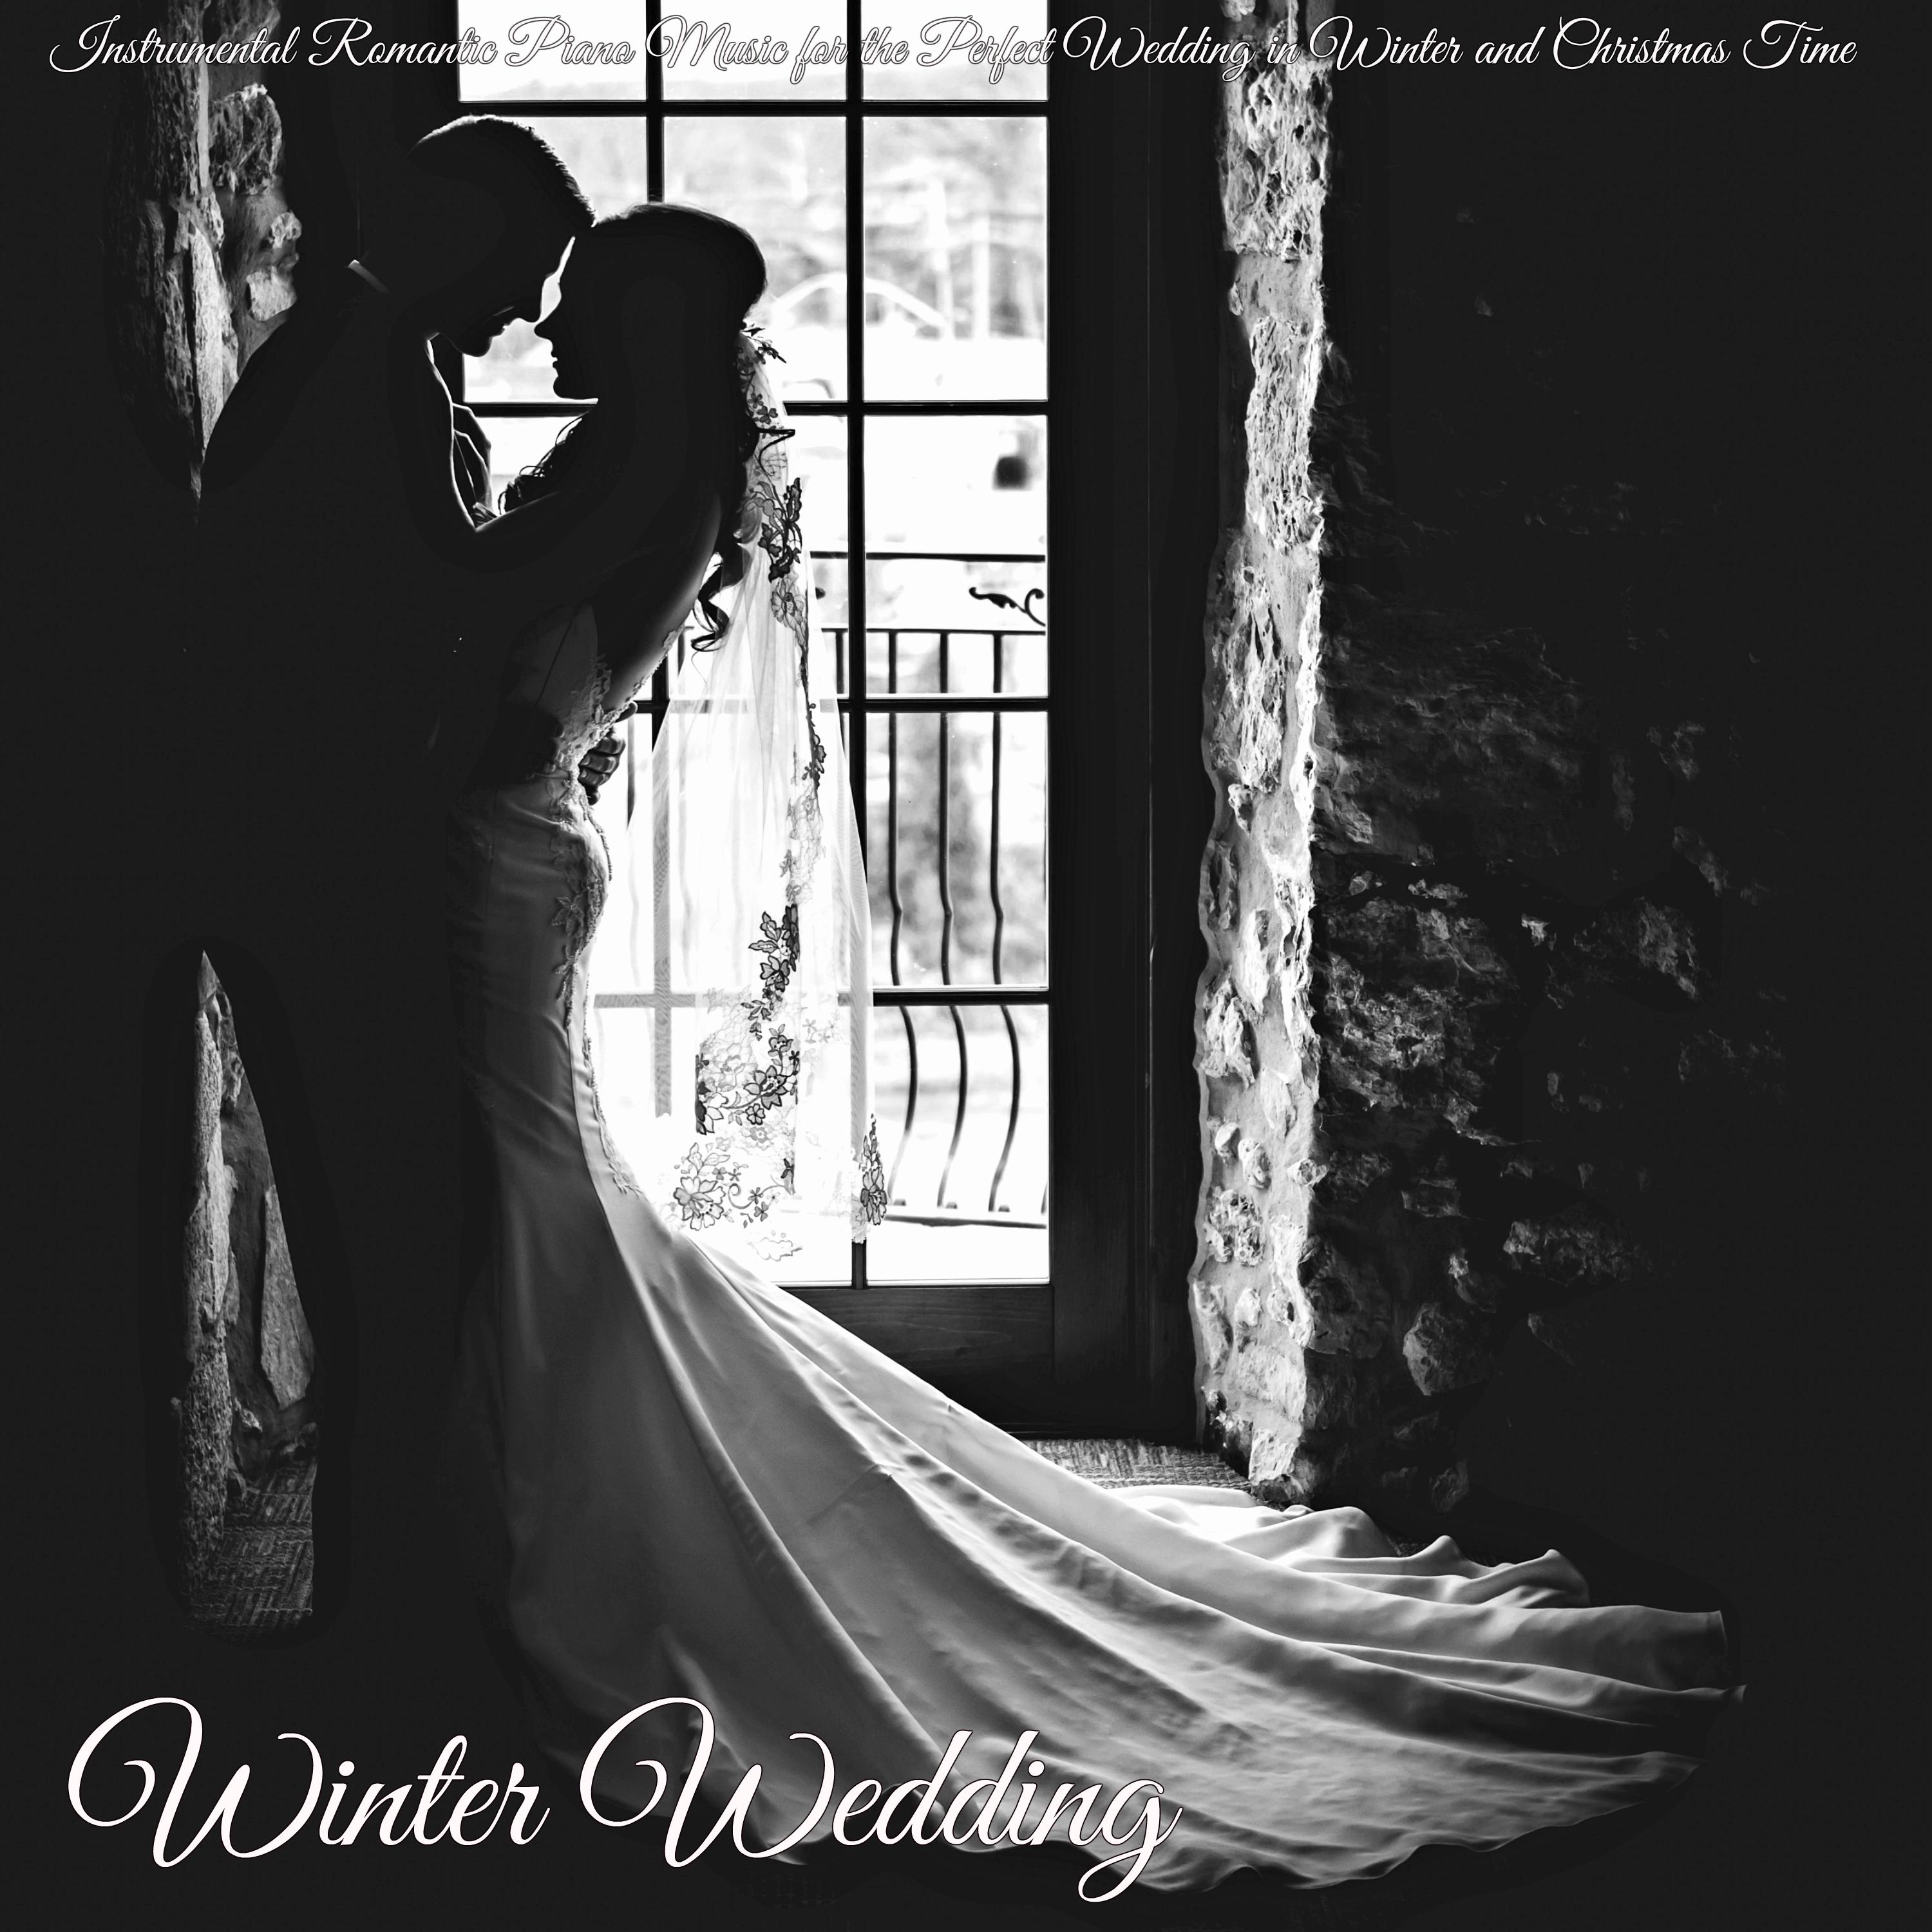 Winter Wedding  Instrumental Romantic Piano Music for the Perfect Wedding in Winter and Christmas Time